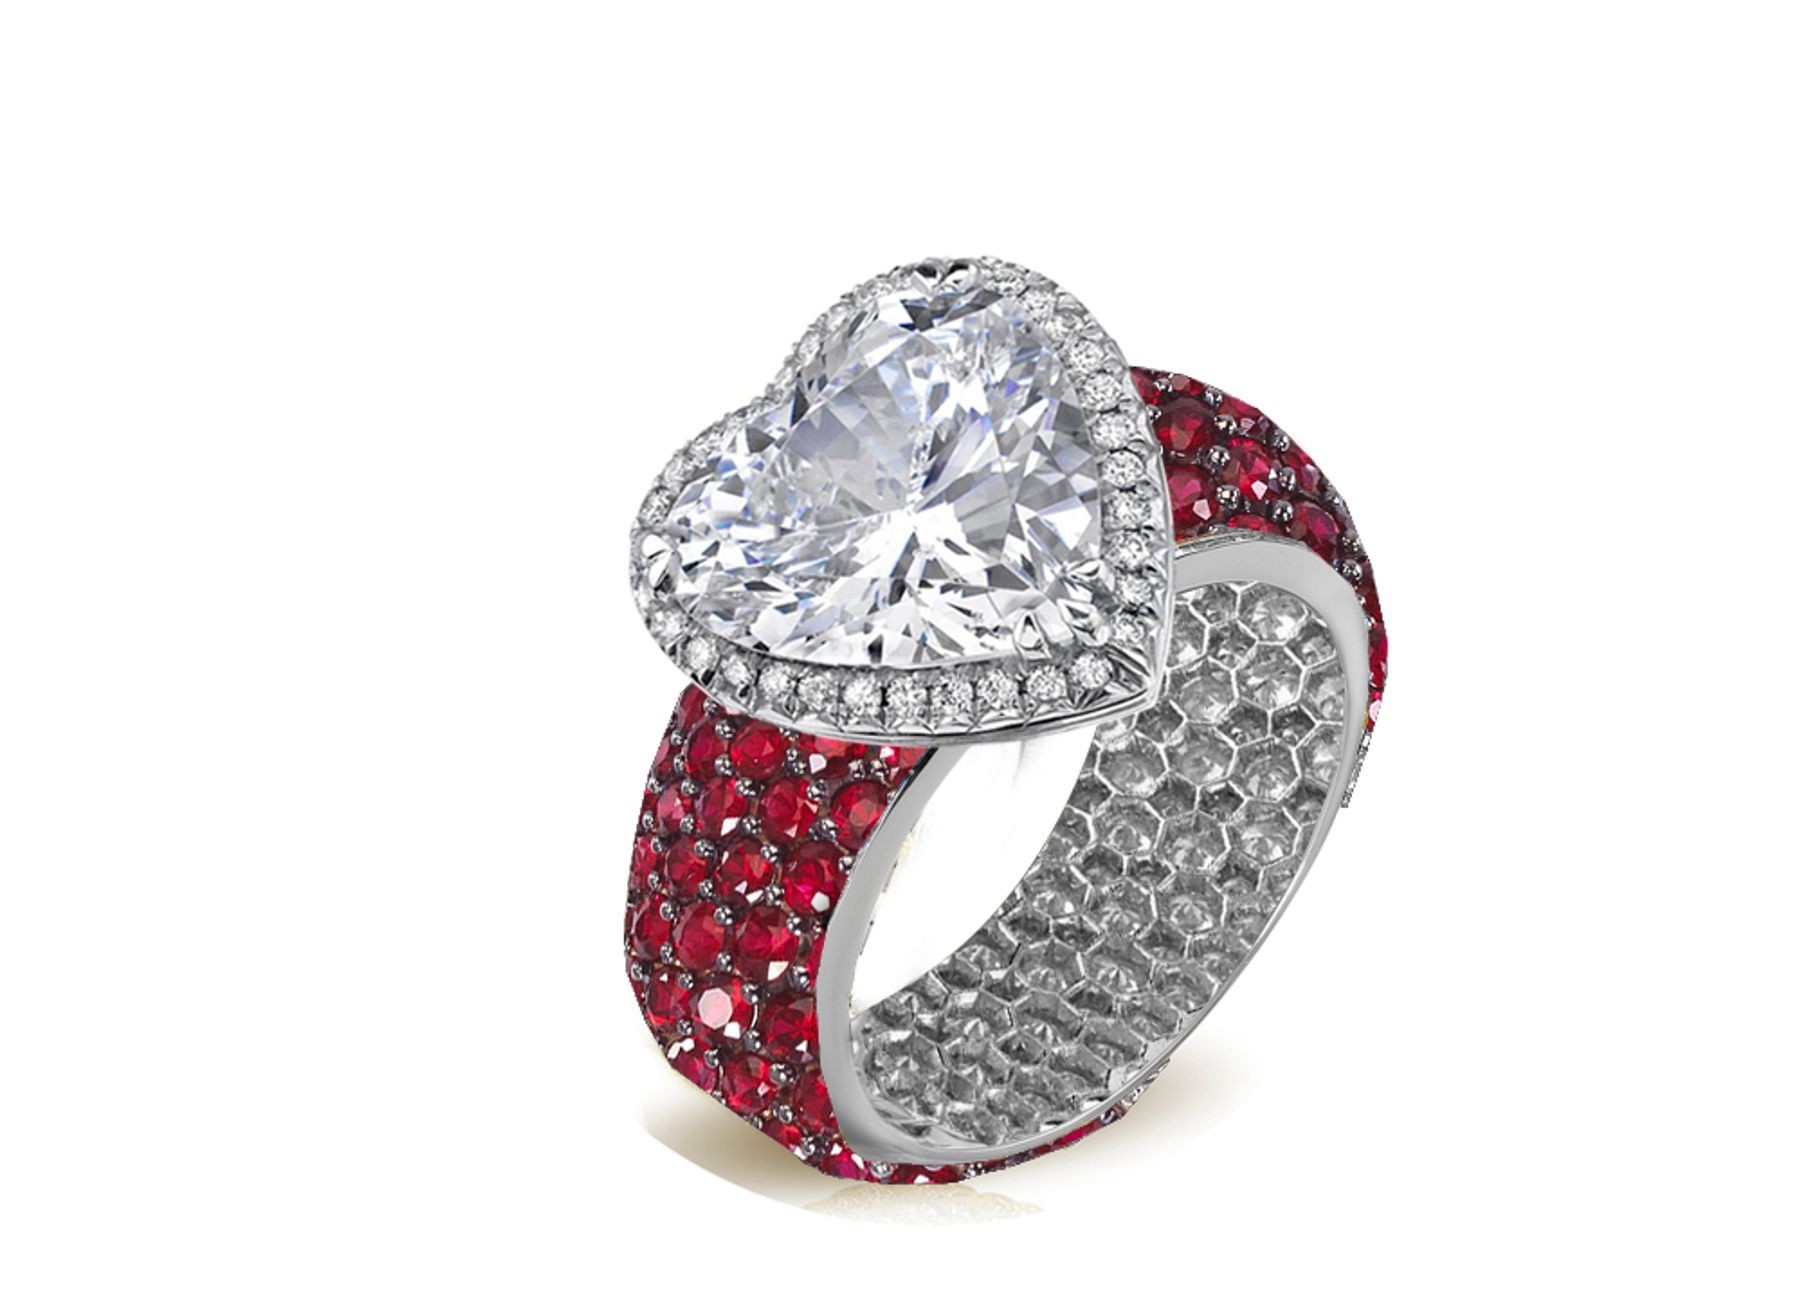 Ring with Heart Diamond & Pave Set Rubies & White Diamonds in Gold or Platinum